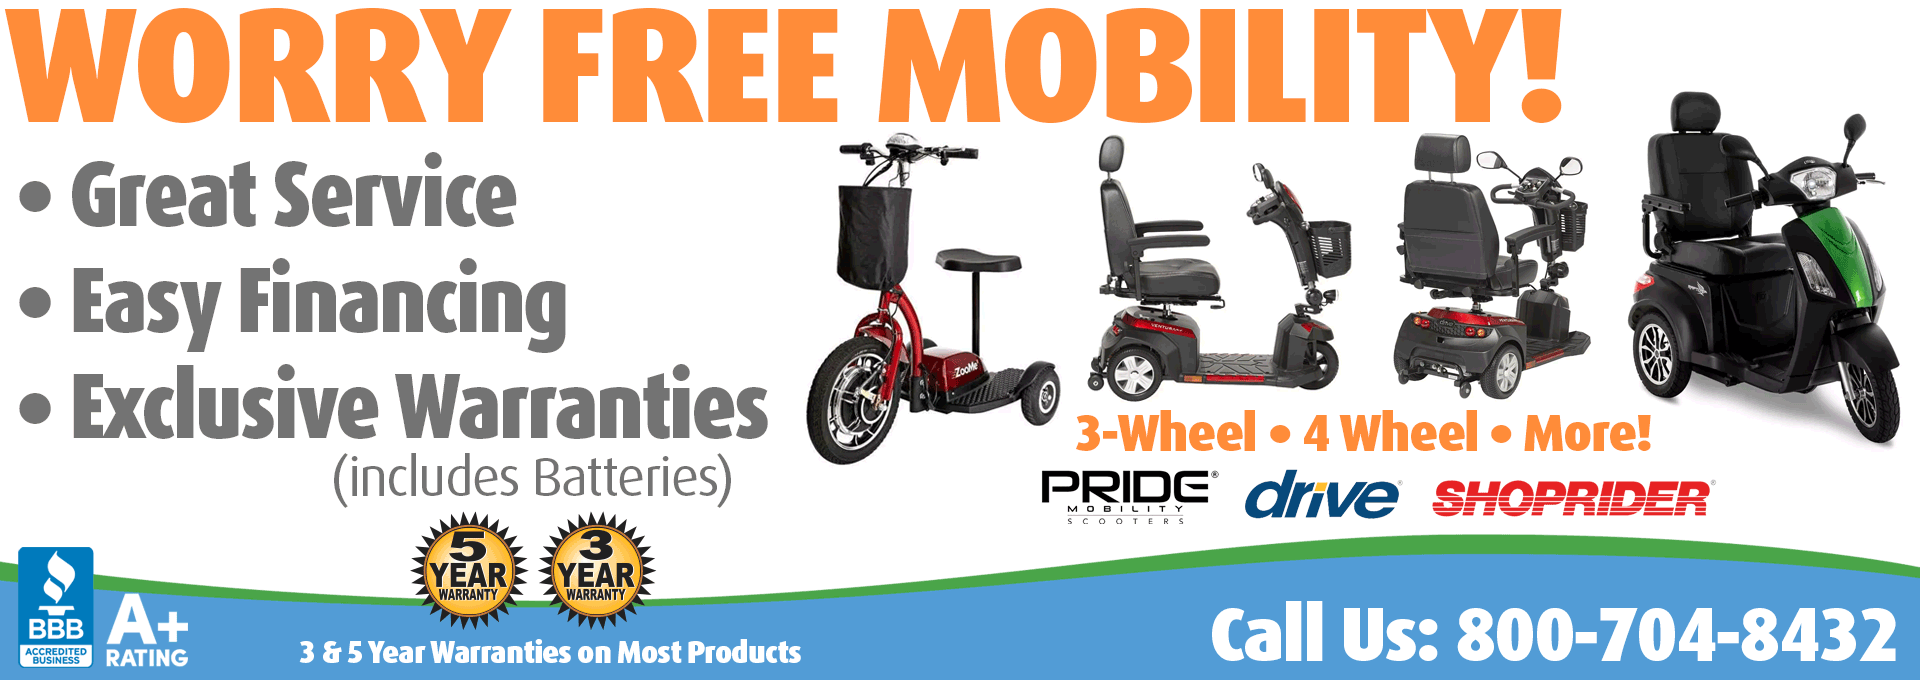 Living Well Stores: Recreational Mobility Scooters with Worry Free Warranties featuring Drive Medical, Pride Mobility, Shoprider and More.